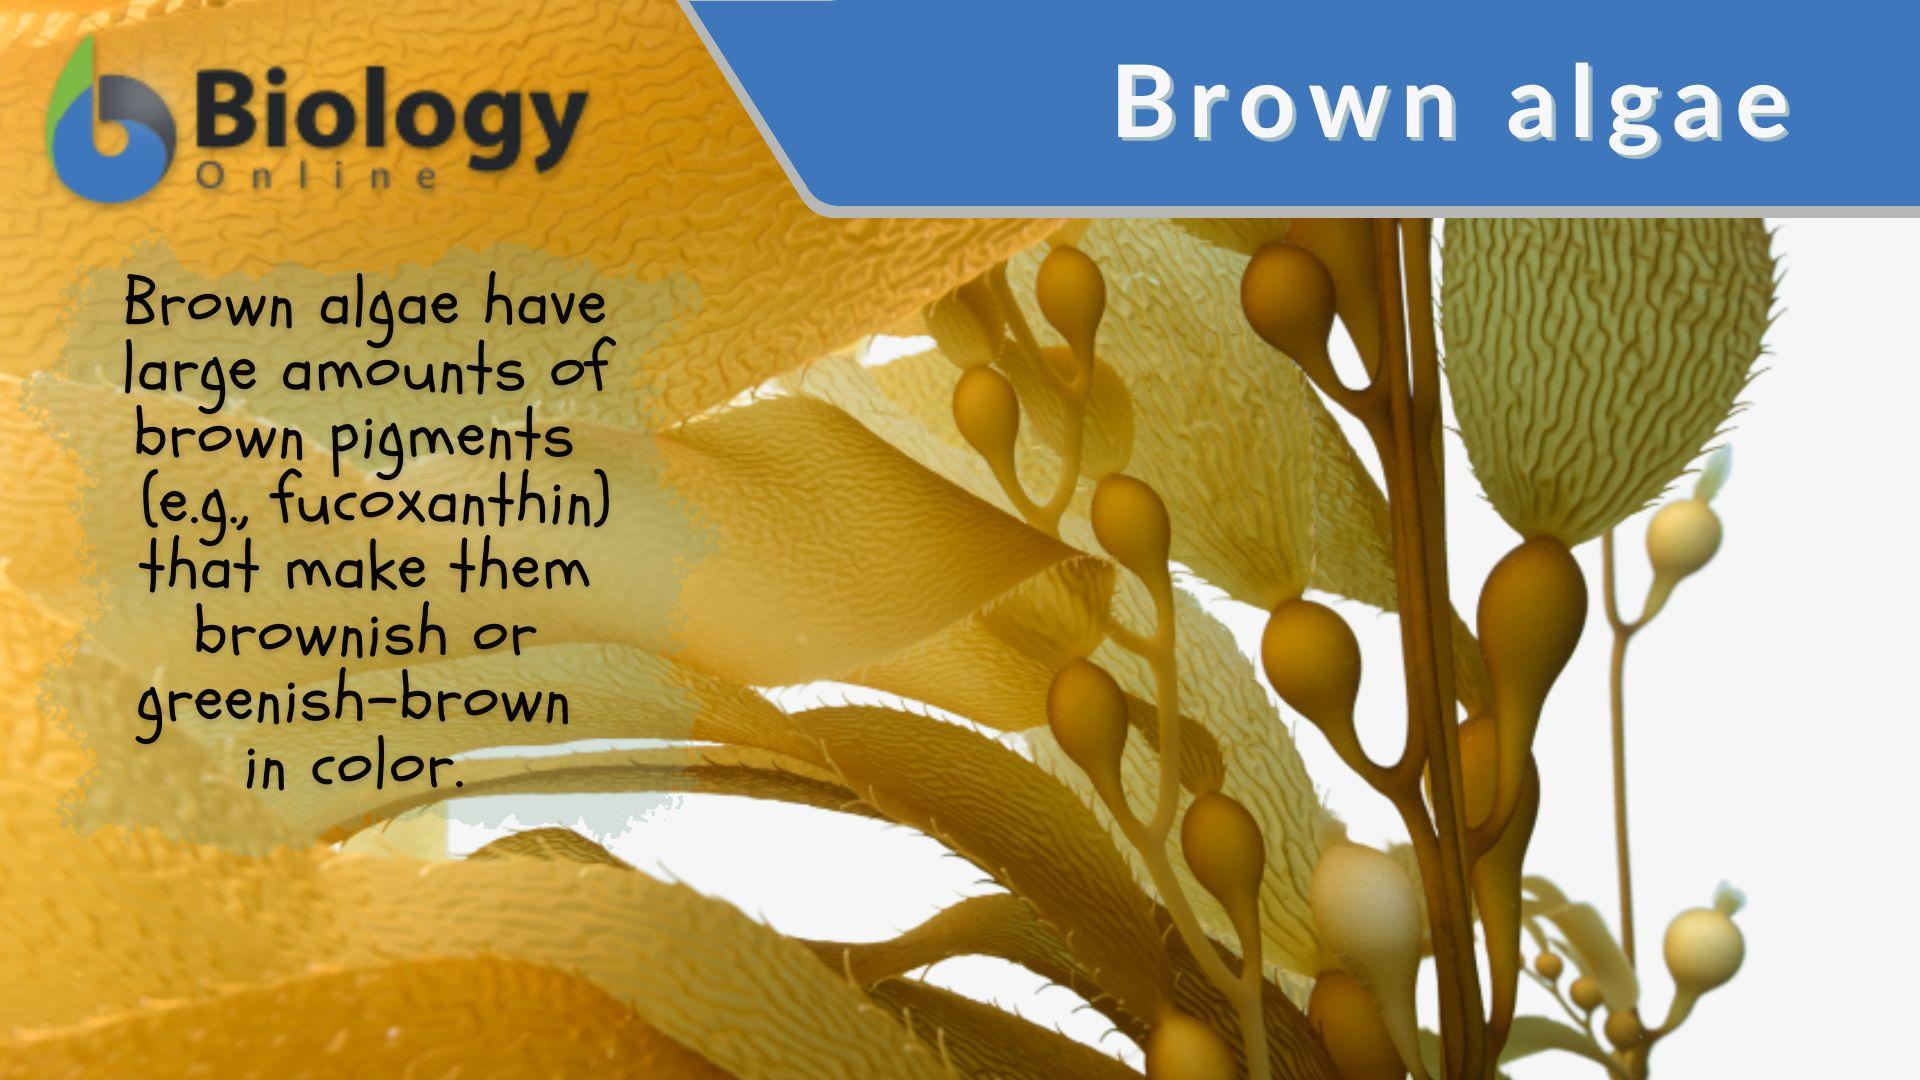 Brown algae - Definition and Examples - Biology Online Dictionary